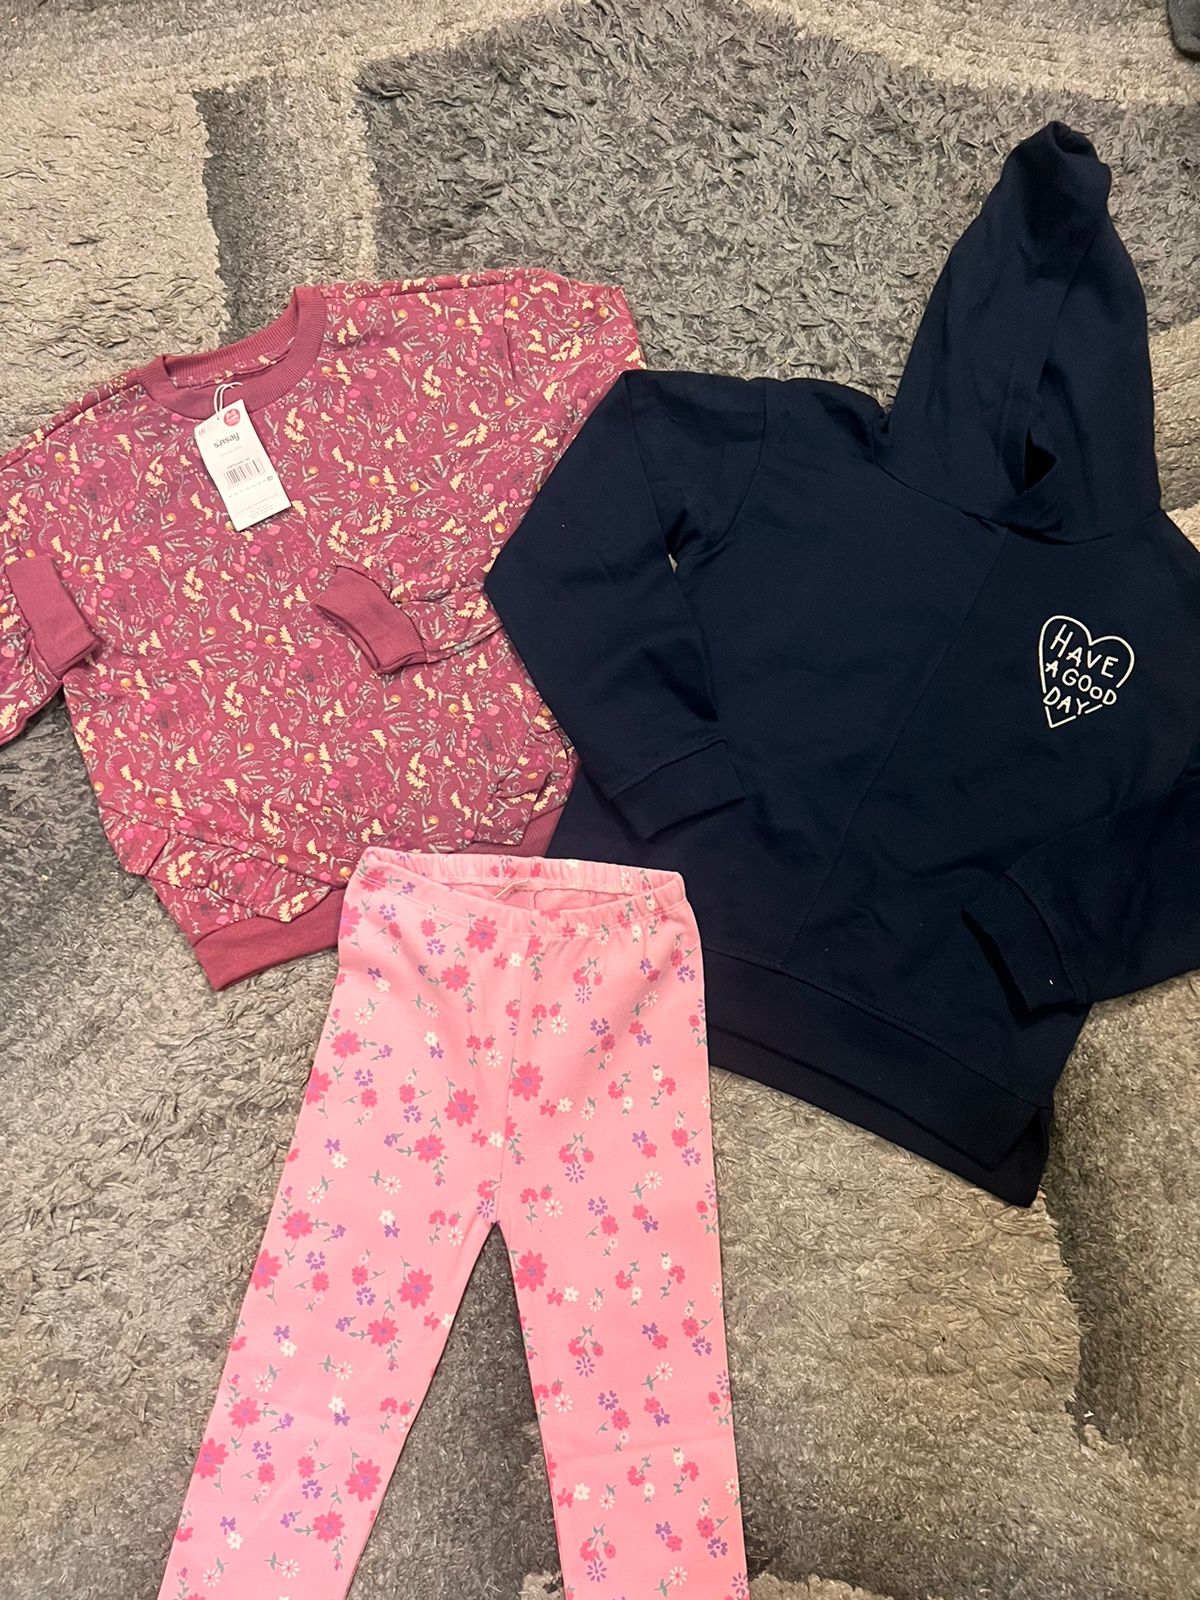 Kids Girls Winter Gala 7-8 Year Deal Pack of 3 Fleece Warm Sets : 1 Shirts with Hoodie and Trouser